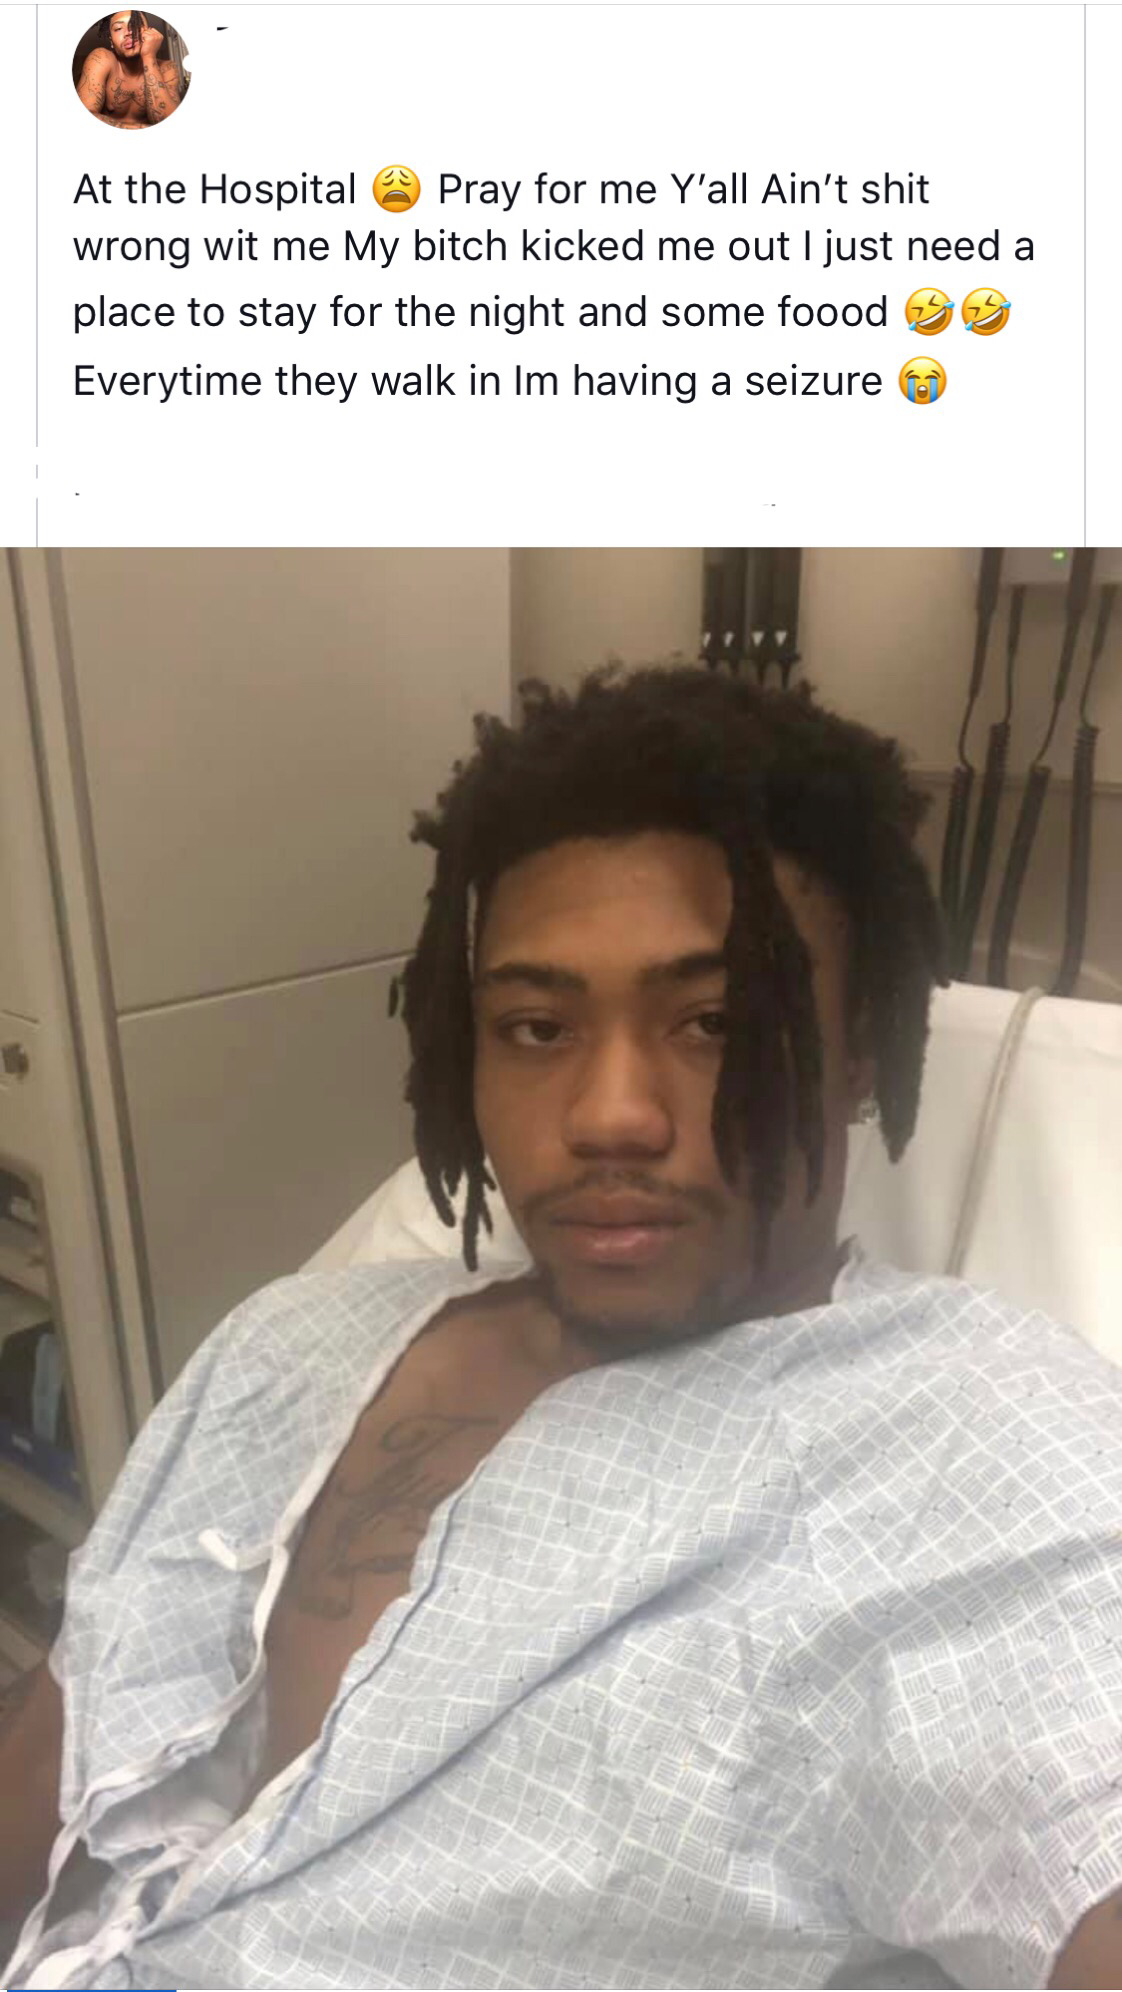 hairstyle - At the Hospitales Pray for me Y'all Ain't shit wrong wit me My bitch kicked me out I just need a place to stay for the night and some foood Everytime they walk in Im having a seizure